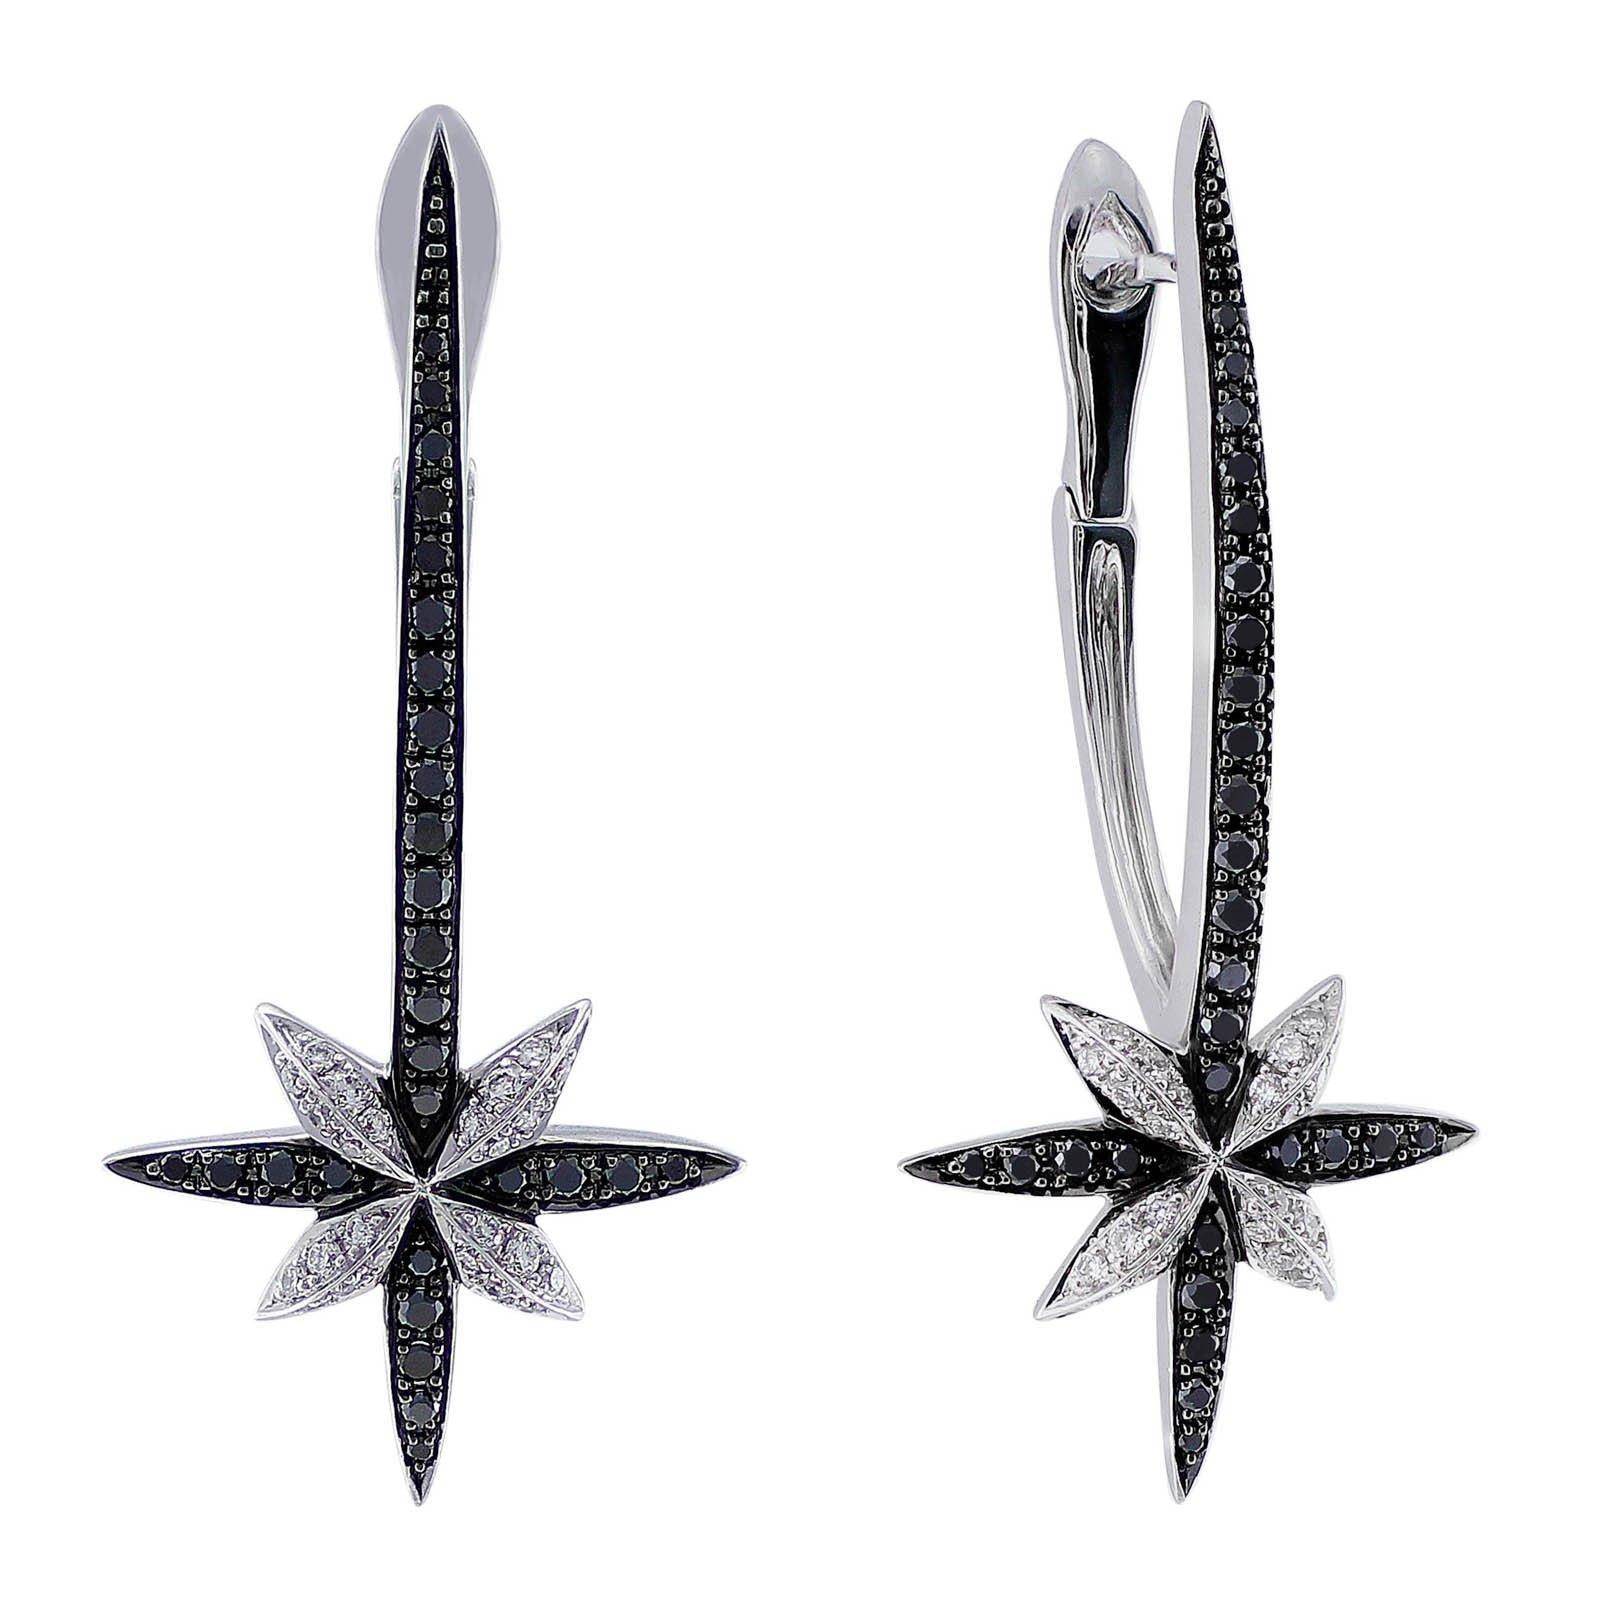 Stephen Webster 18kt white gold black diamond cross earrings. Unique cross and star design with 56 black diamonds approximately 0.42ctw and 48 clear diamonds 0.22ctw.